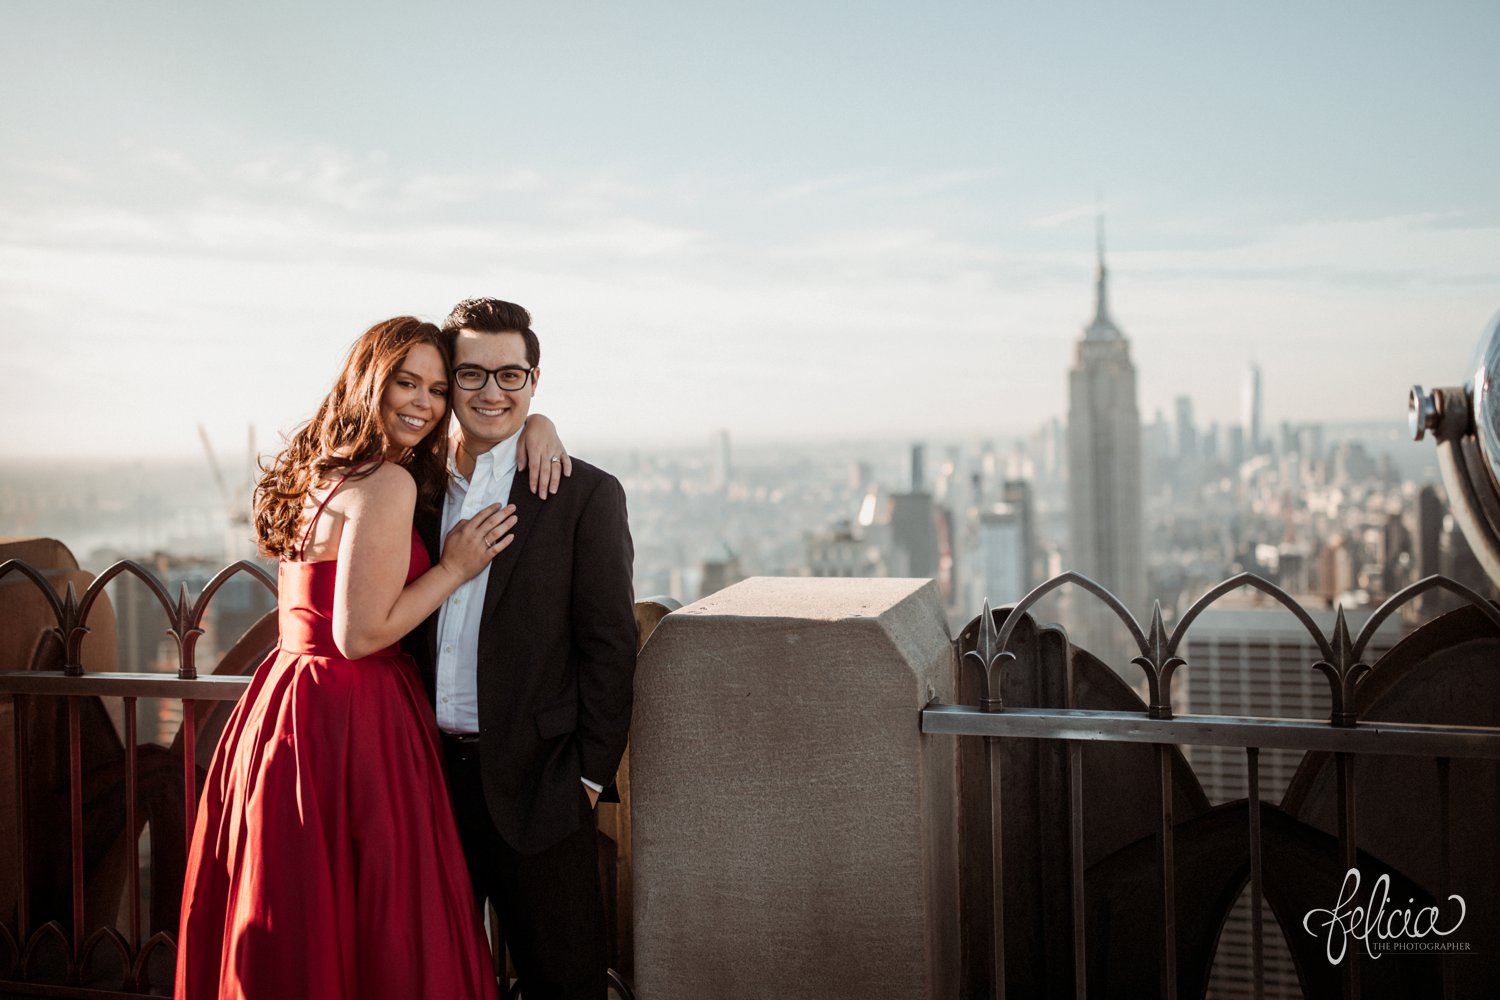 images by feliciathephotographer.com | destination wedding photographer | engagement | new york city | skyline | downtown | urban | formal | classic | elegant | long red gown | suit and tie | top of the rock | sunrise | elegant | glam | kiss | 